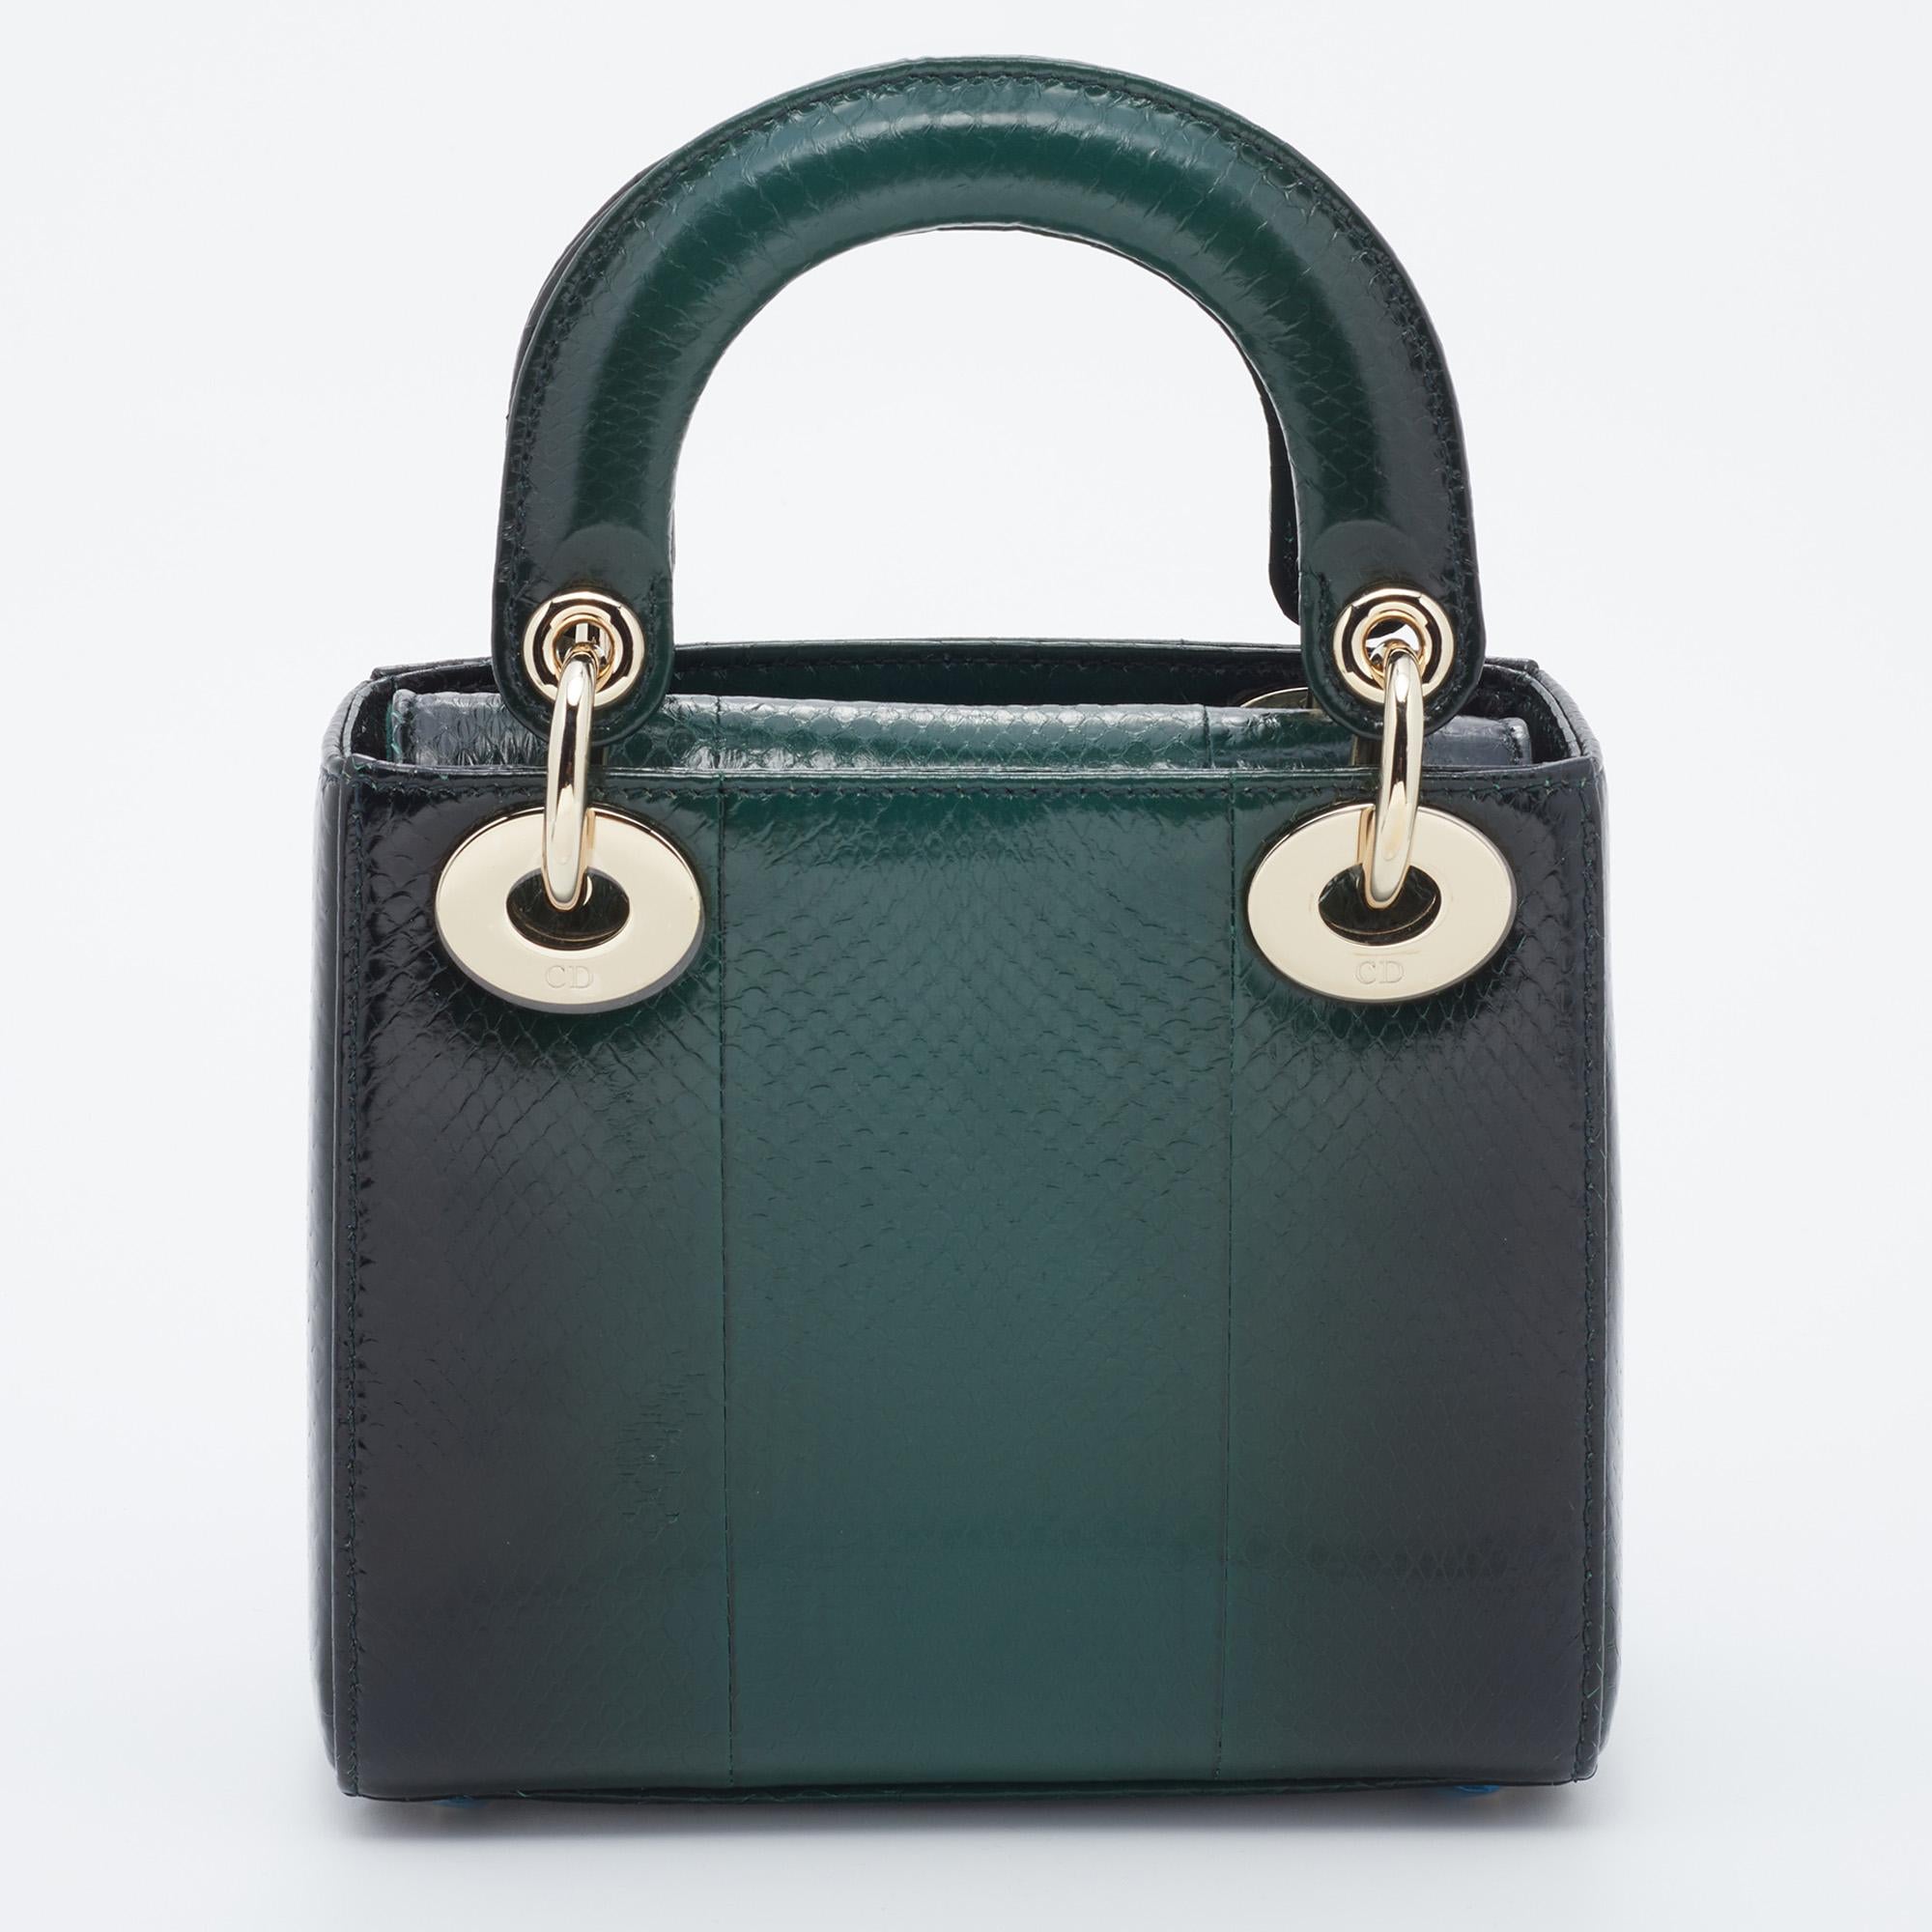 A timeless status and great design mark the Lady Dior tote. It is an iconic bag that people continue to invest in to this day. We have here this mini Lady Dior chain tote crafted from Ayers leather. The mesmerizing green bag is complete with two top